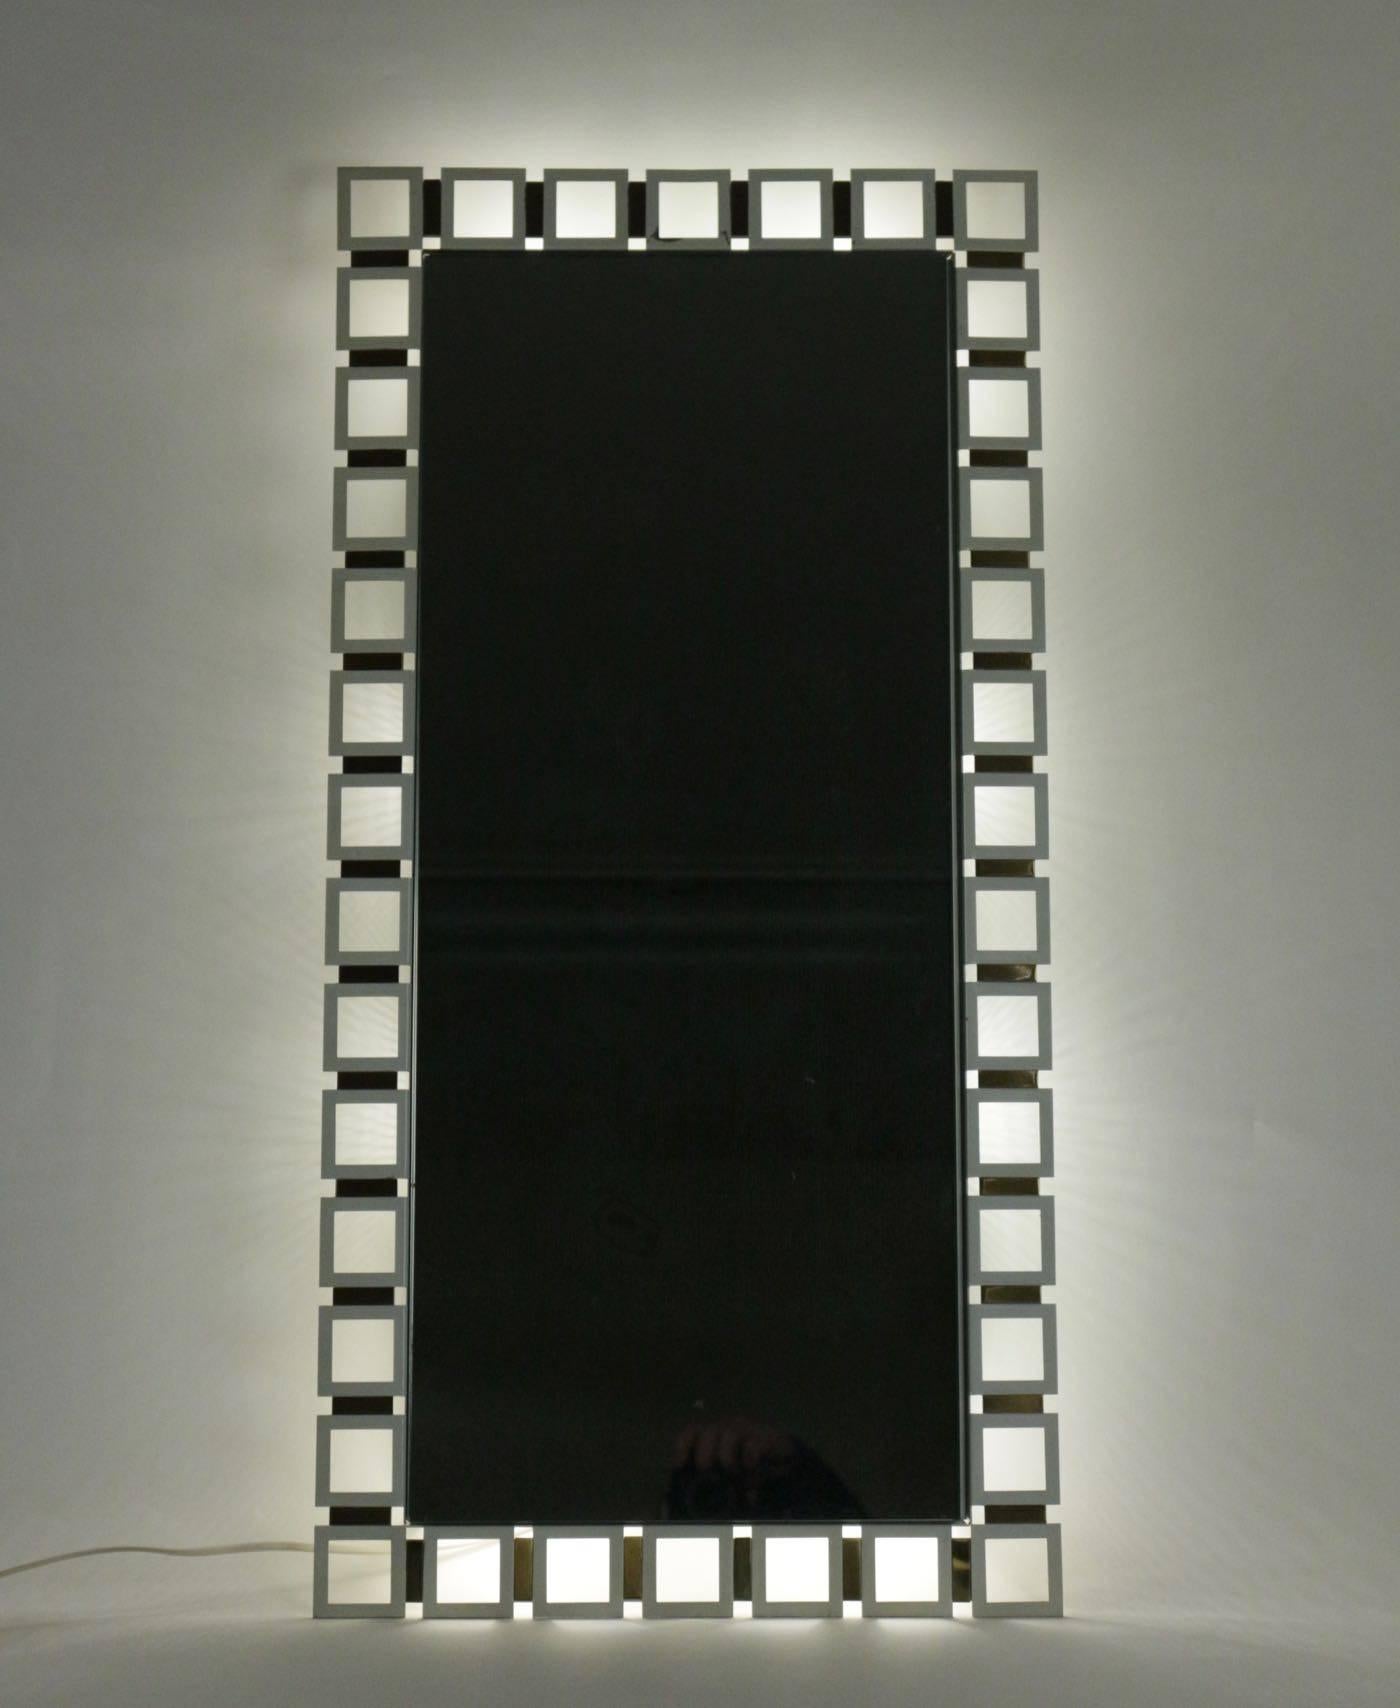 Illuminated rectangular mirror, stainless steel and pewter with white glass, circa 1970.
 